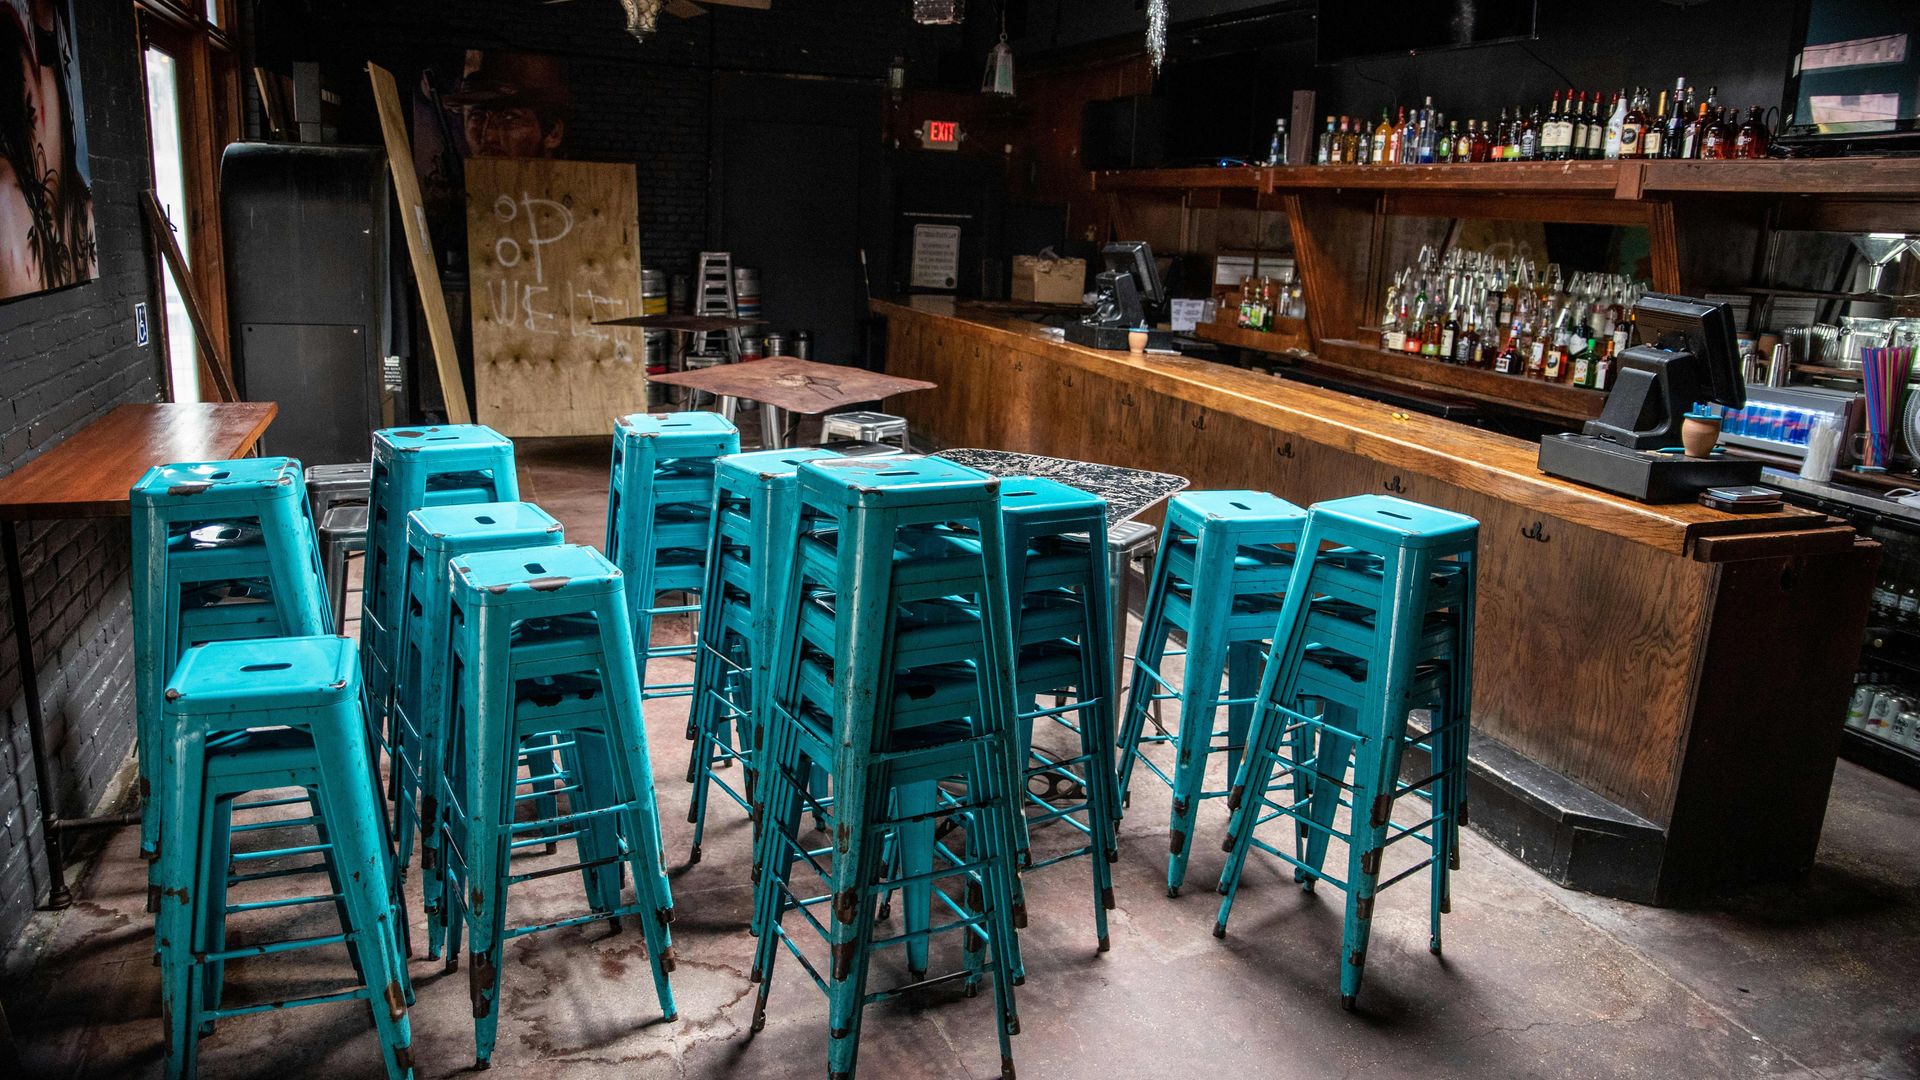 An empty bar in Texs with bar stools stacked on top of each other